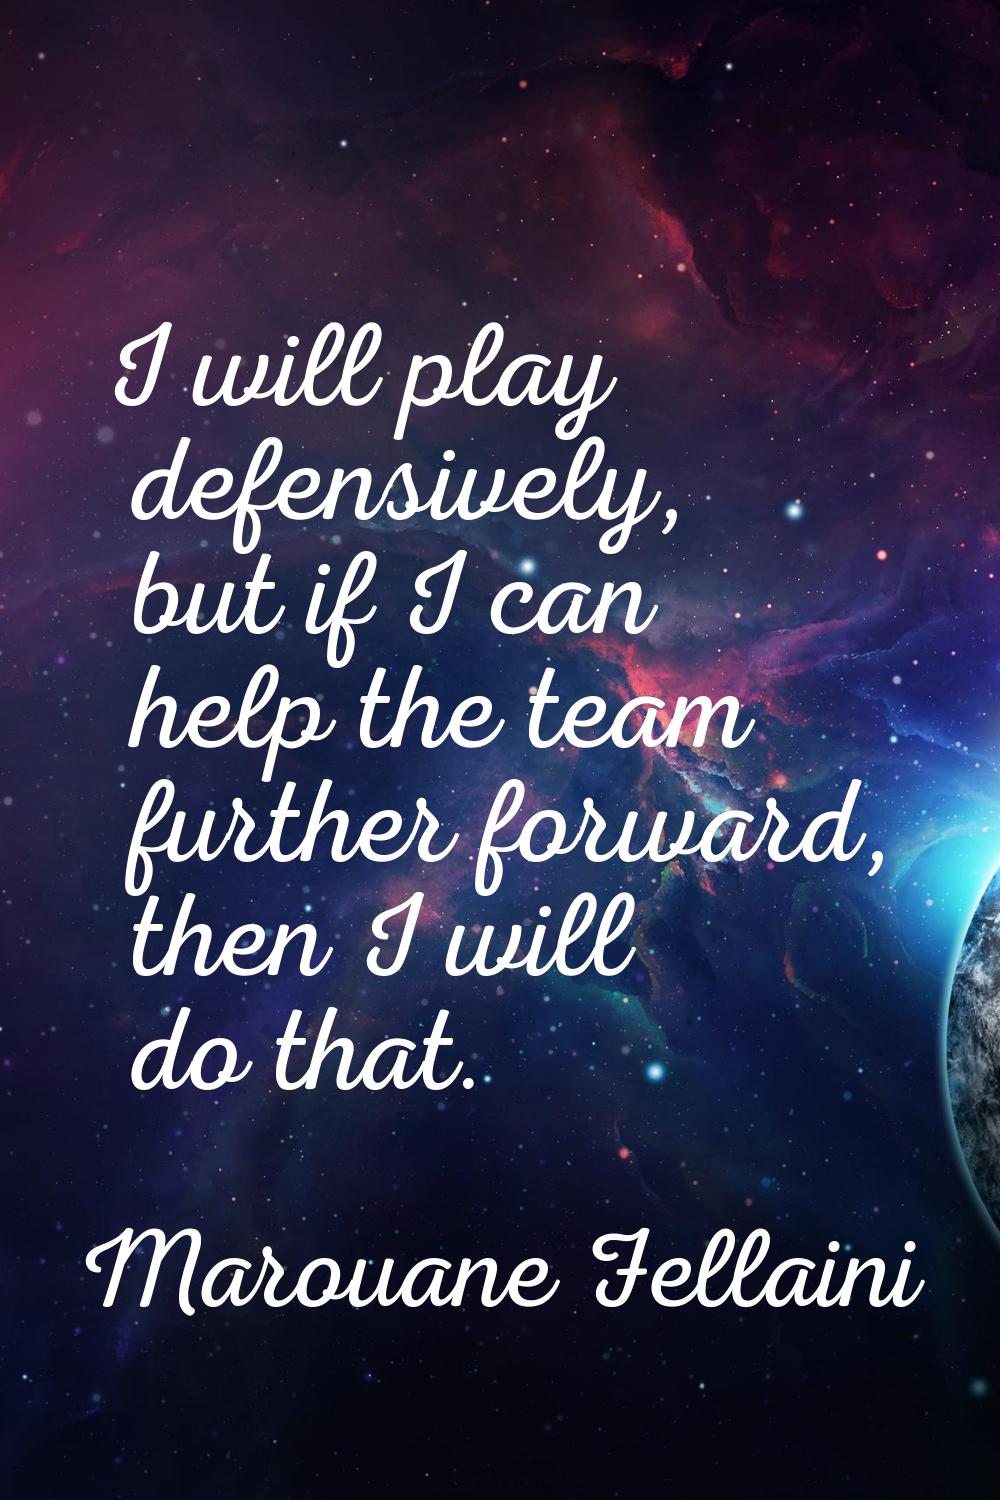 I will play defensively, but if I can help the team further forward, then I will do that.